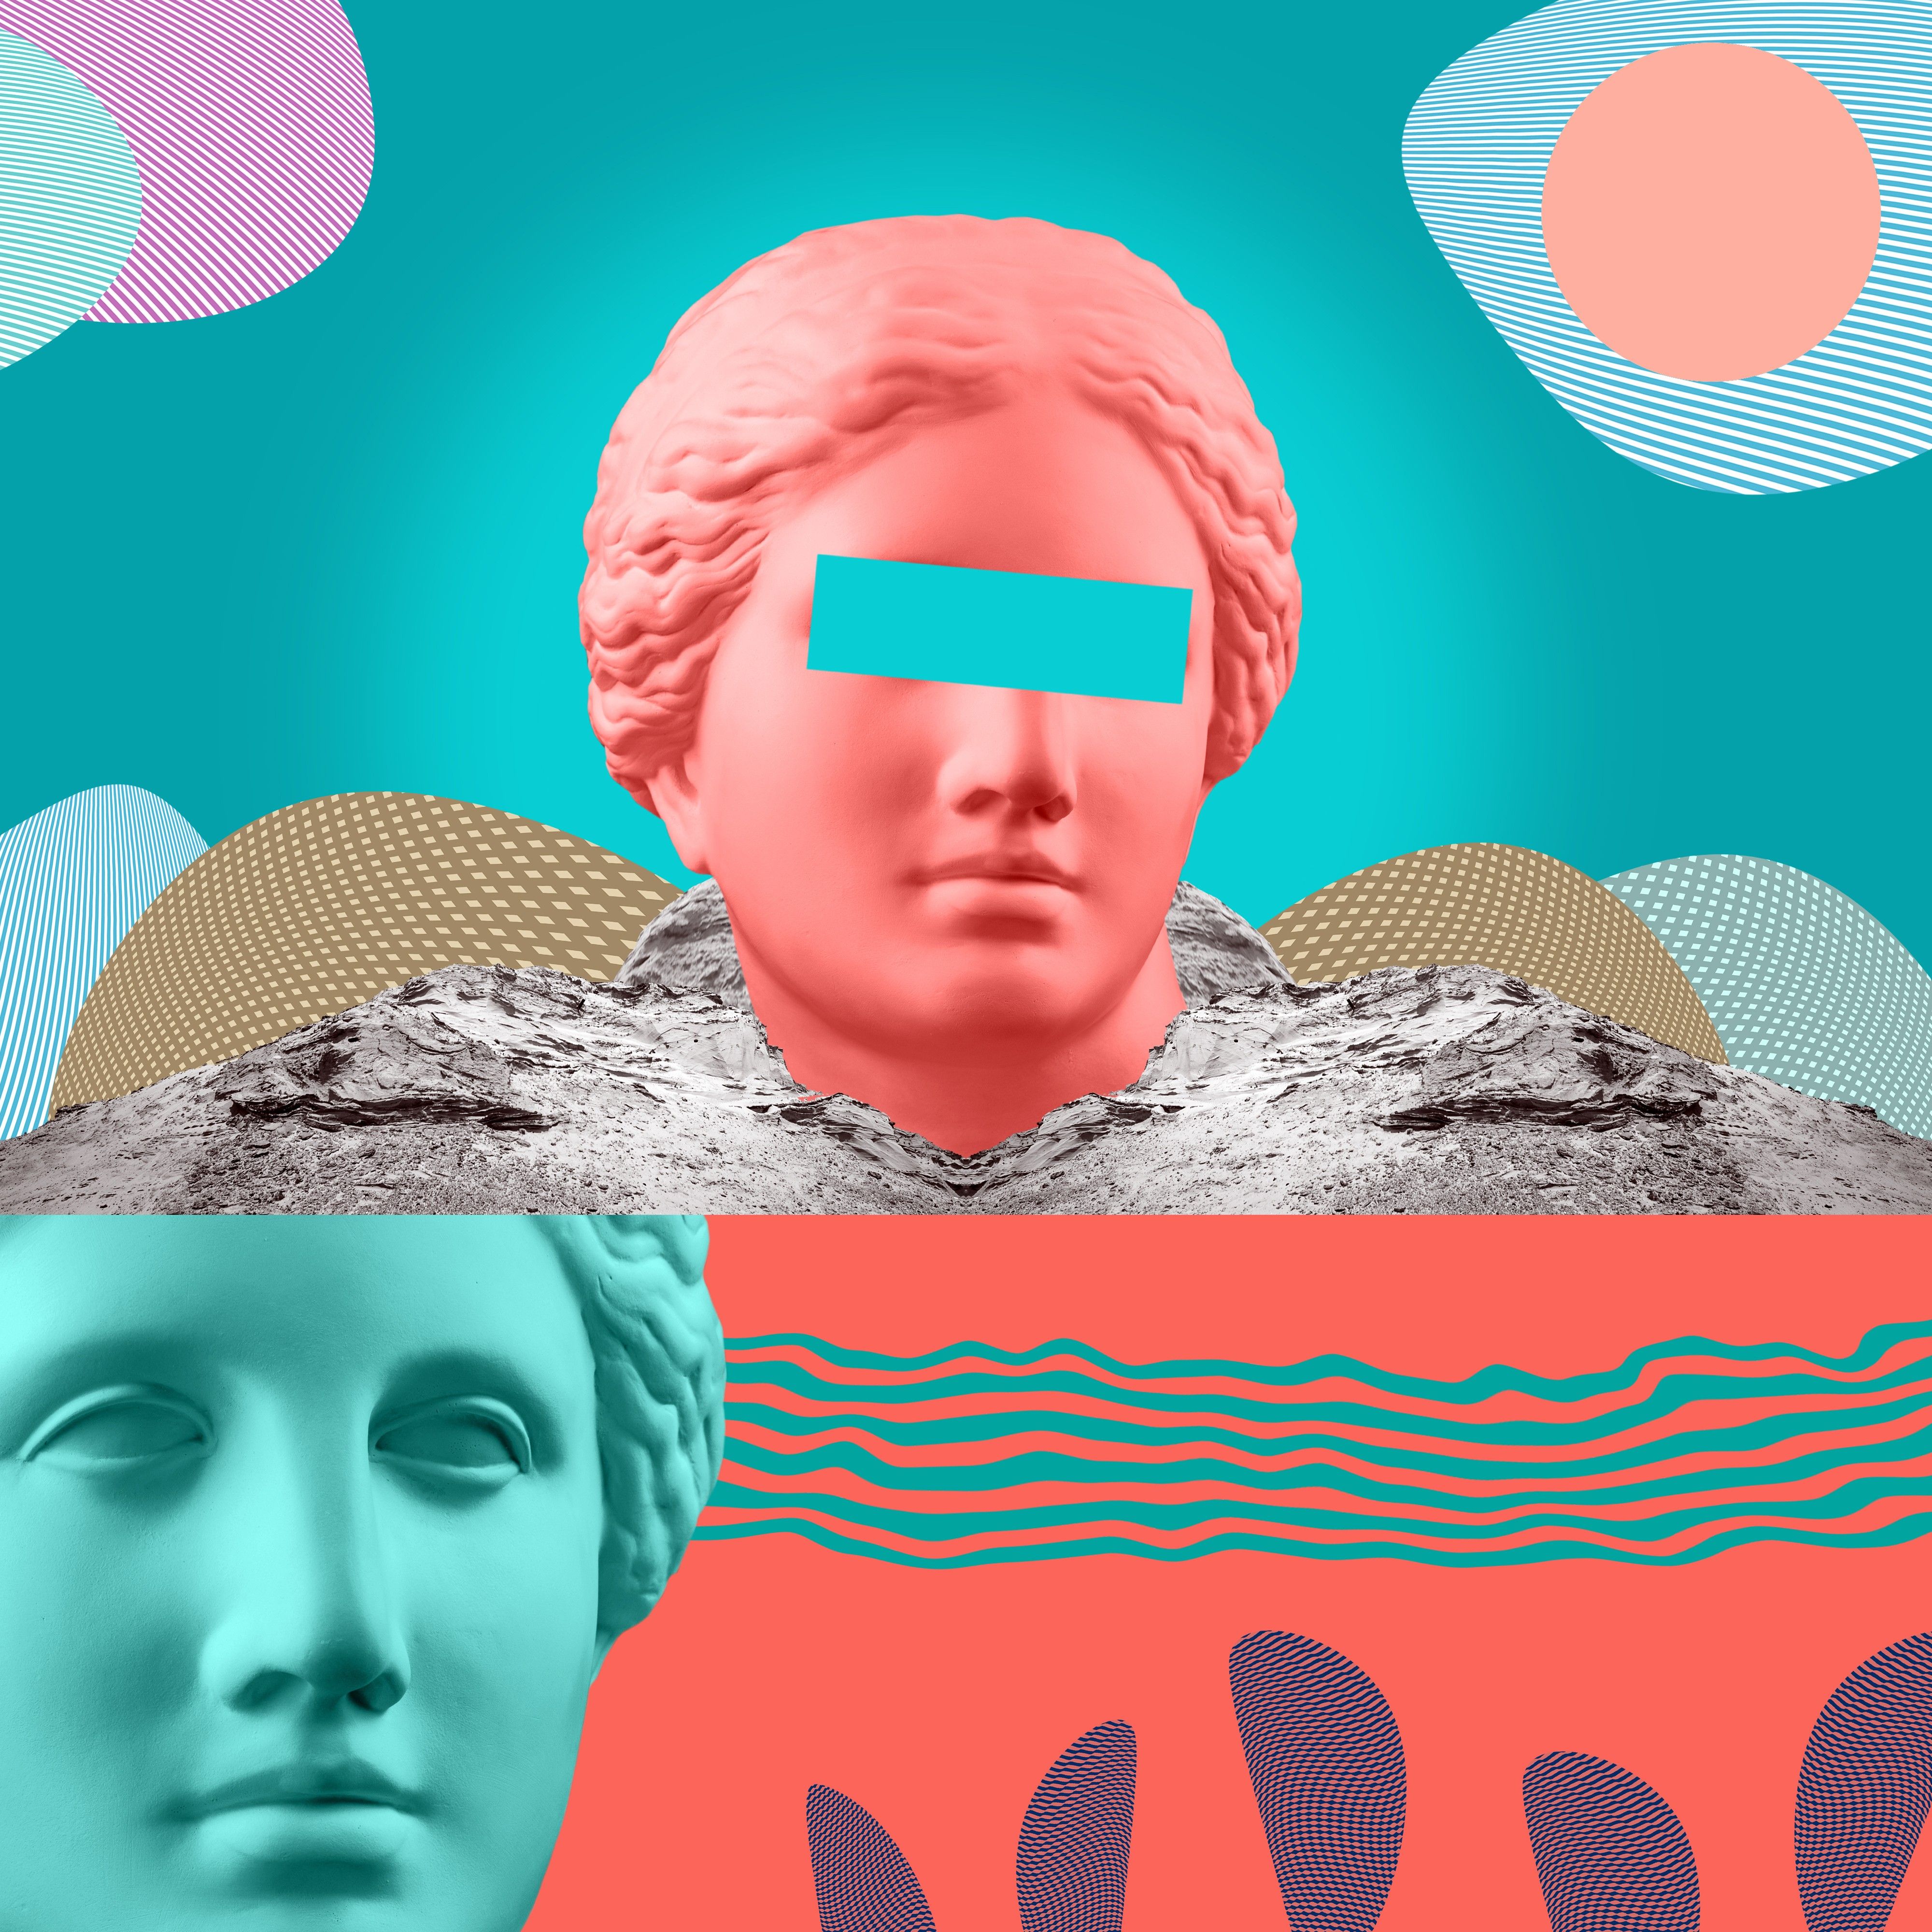 Modern-conceptual-art-poster-with-ancient-statue-of-bust-of-Venus